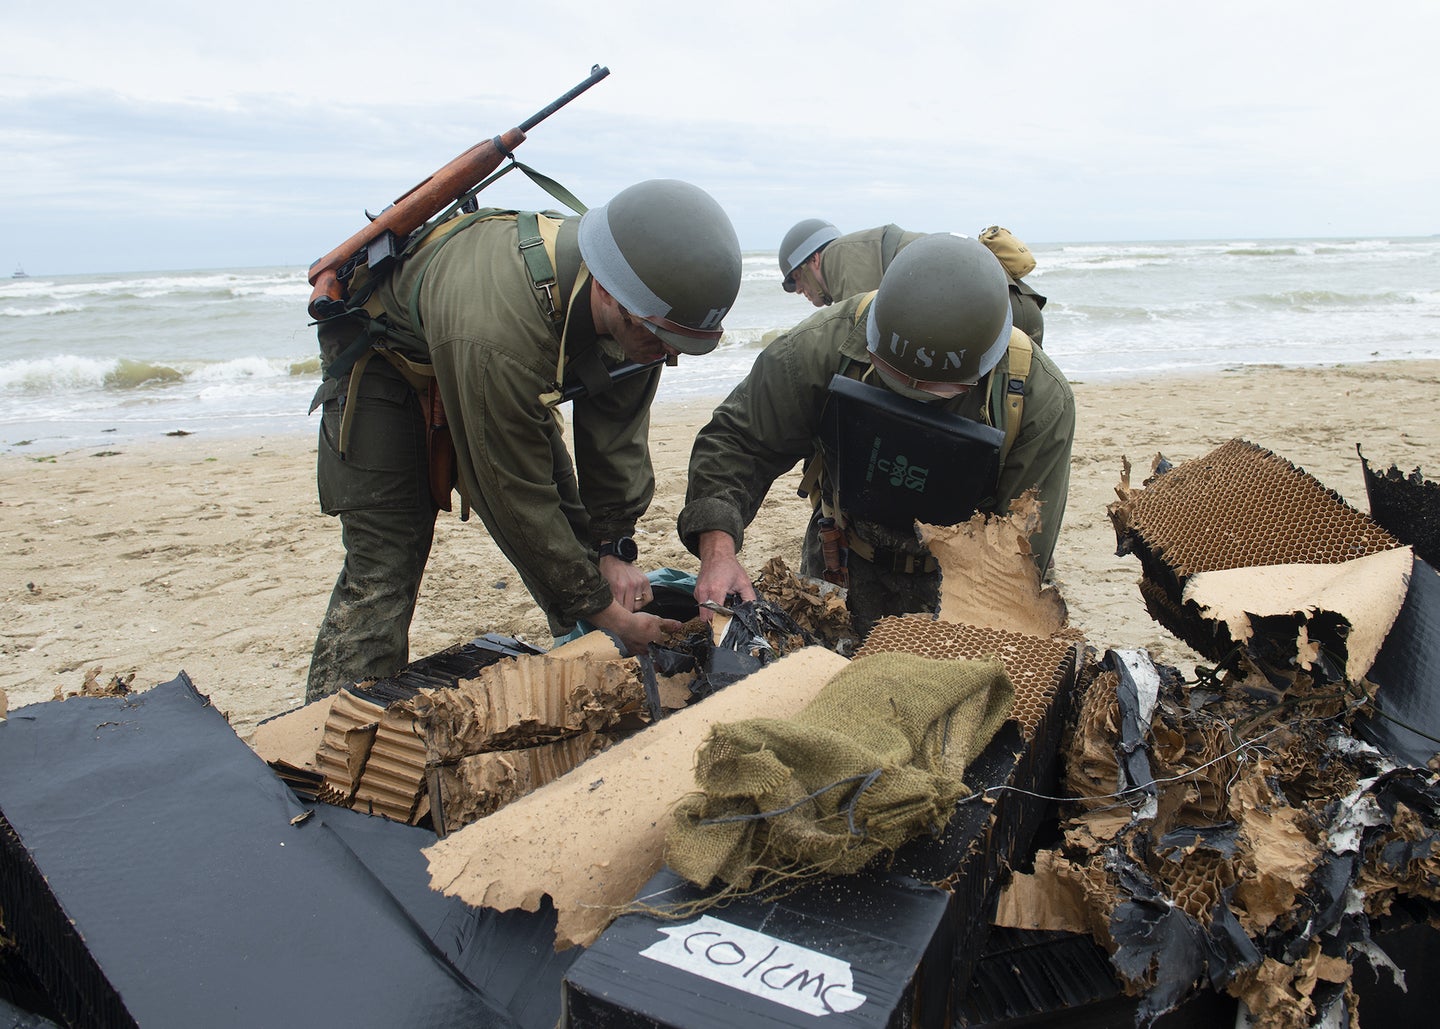 In 2019, Navy SEALs took part in a D-Day reenactment in France, wearing gear from the time period and cleaning up debris afterwards.